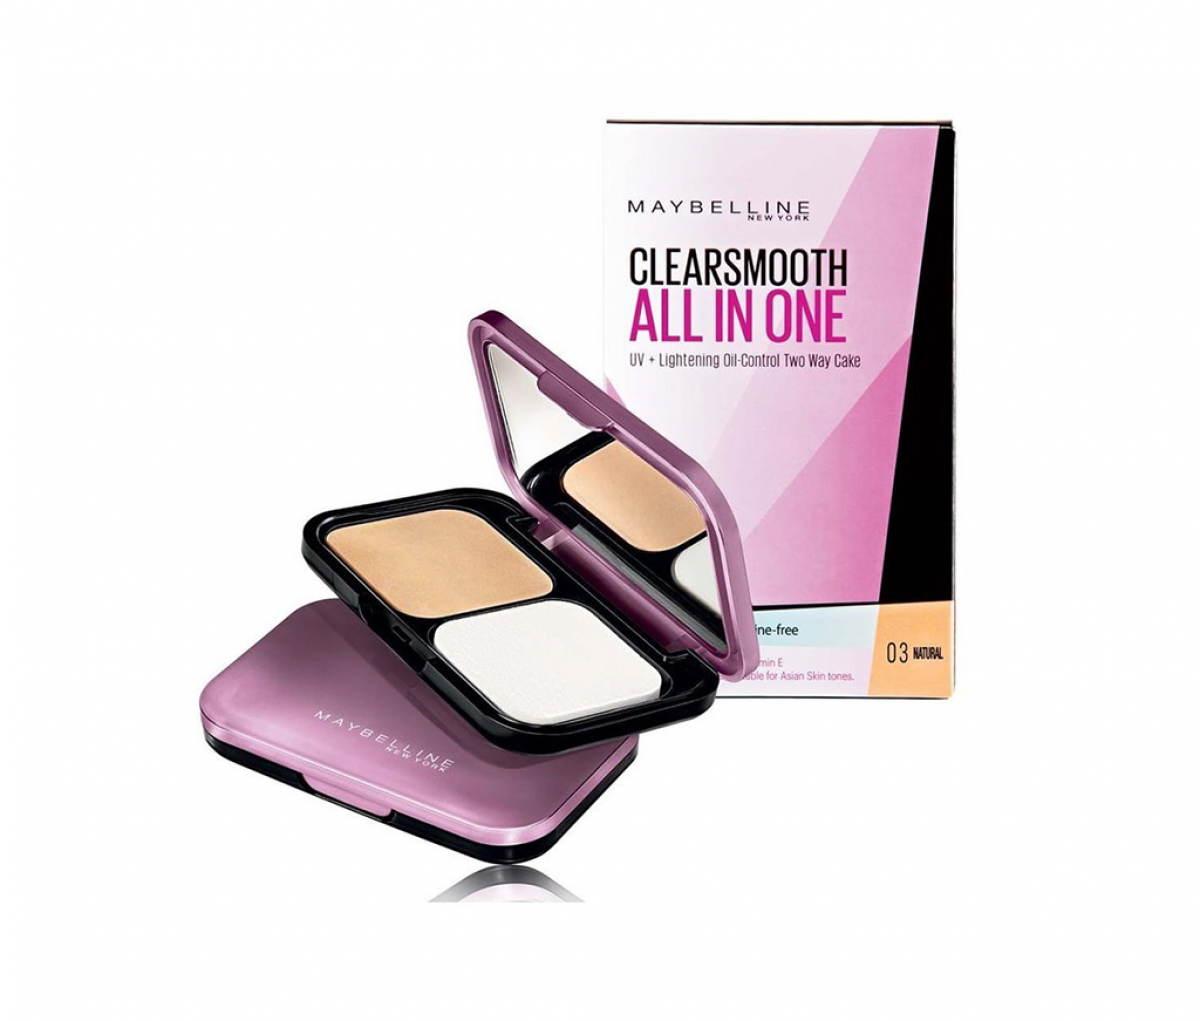 Maybelline Clearsmooth All In One Face Powder PA 03 Natural